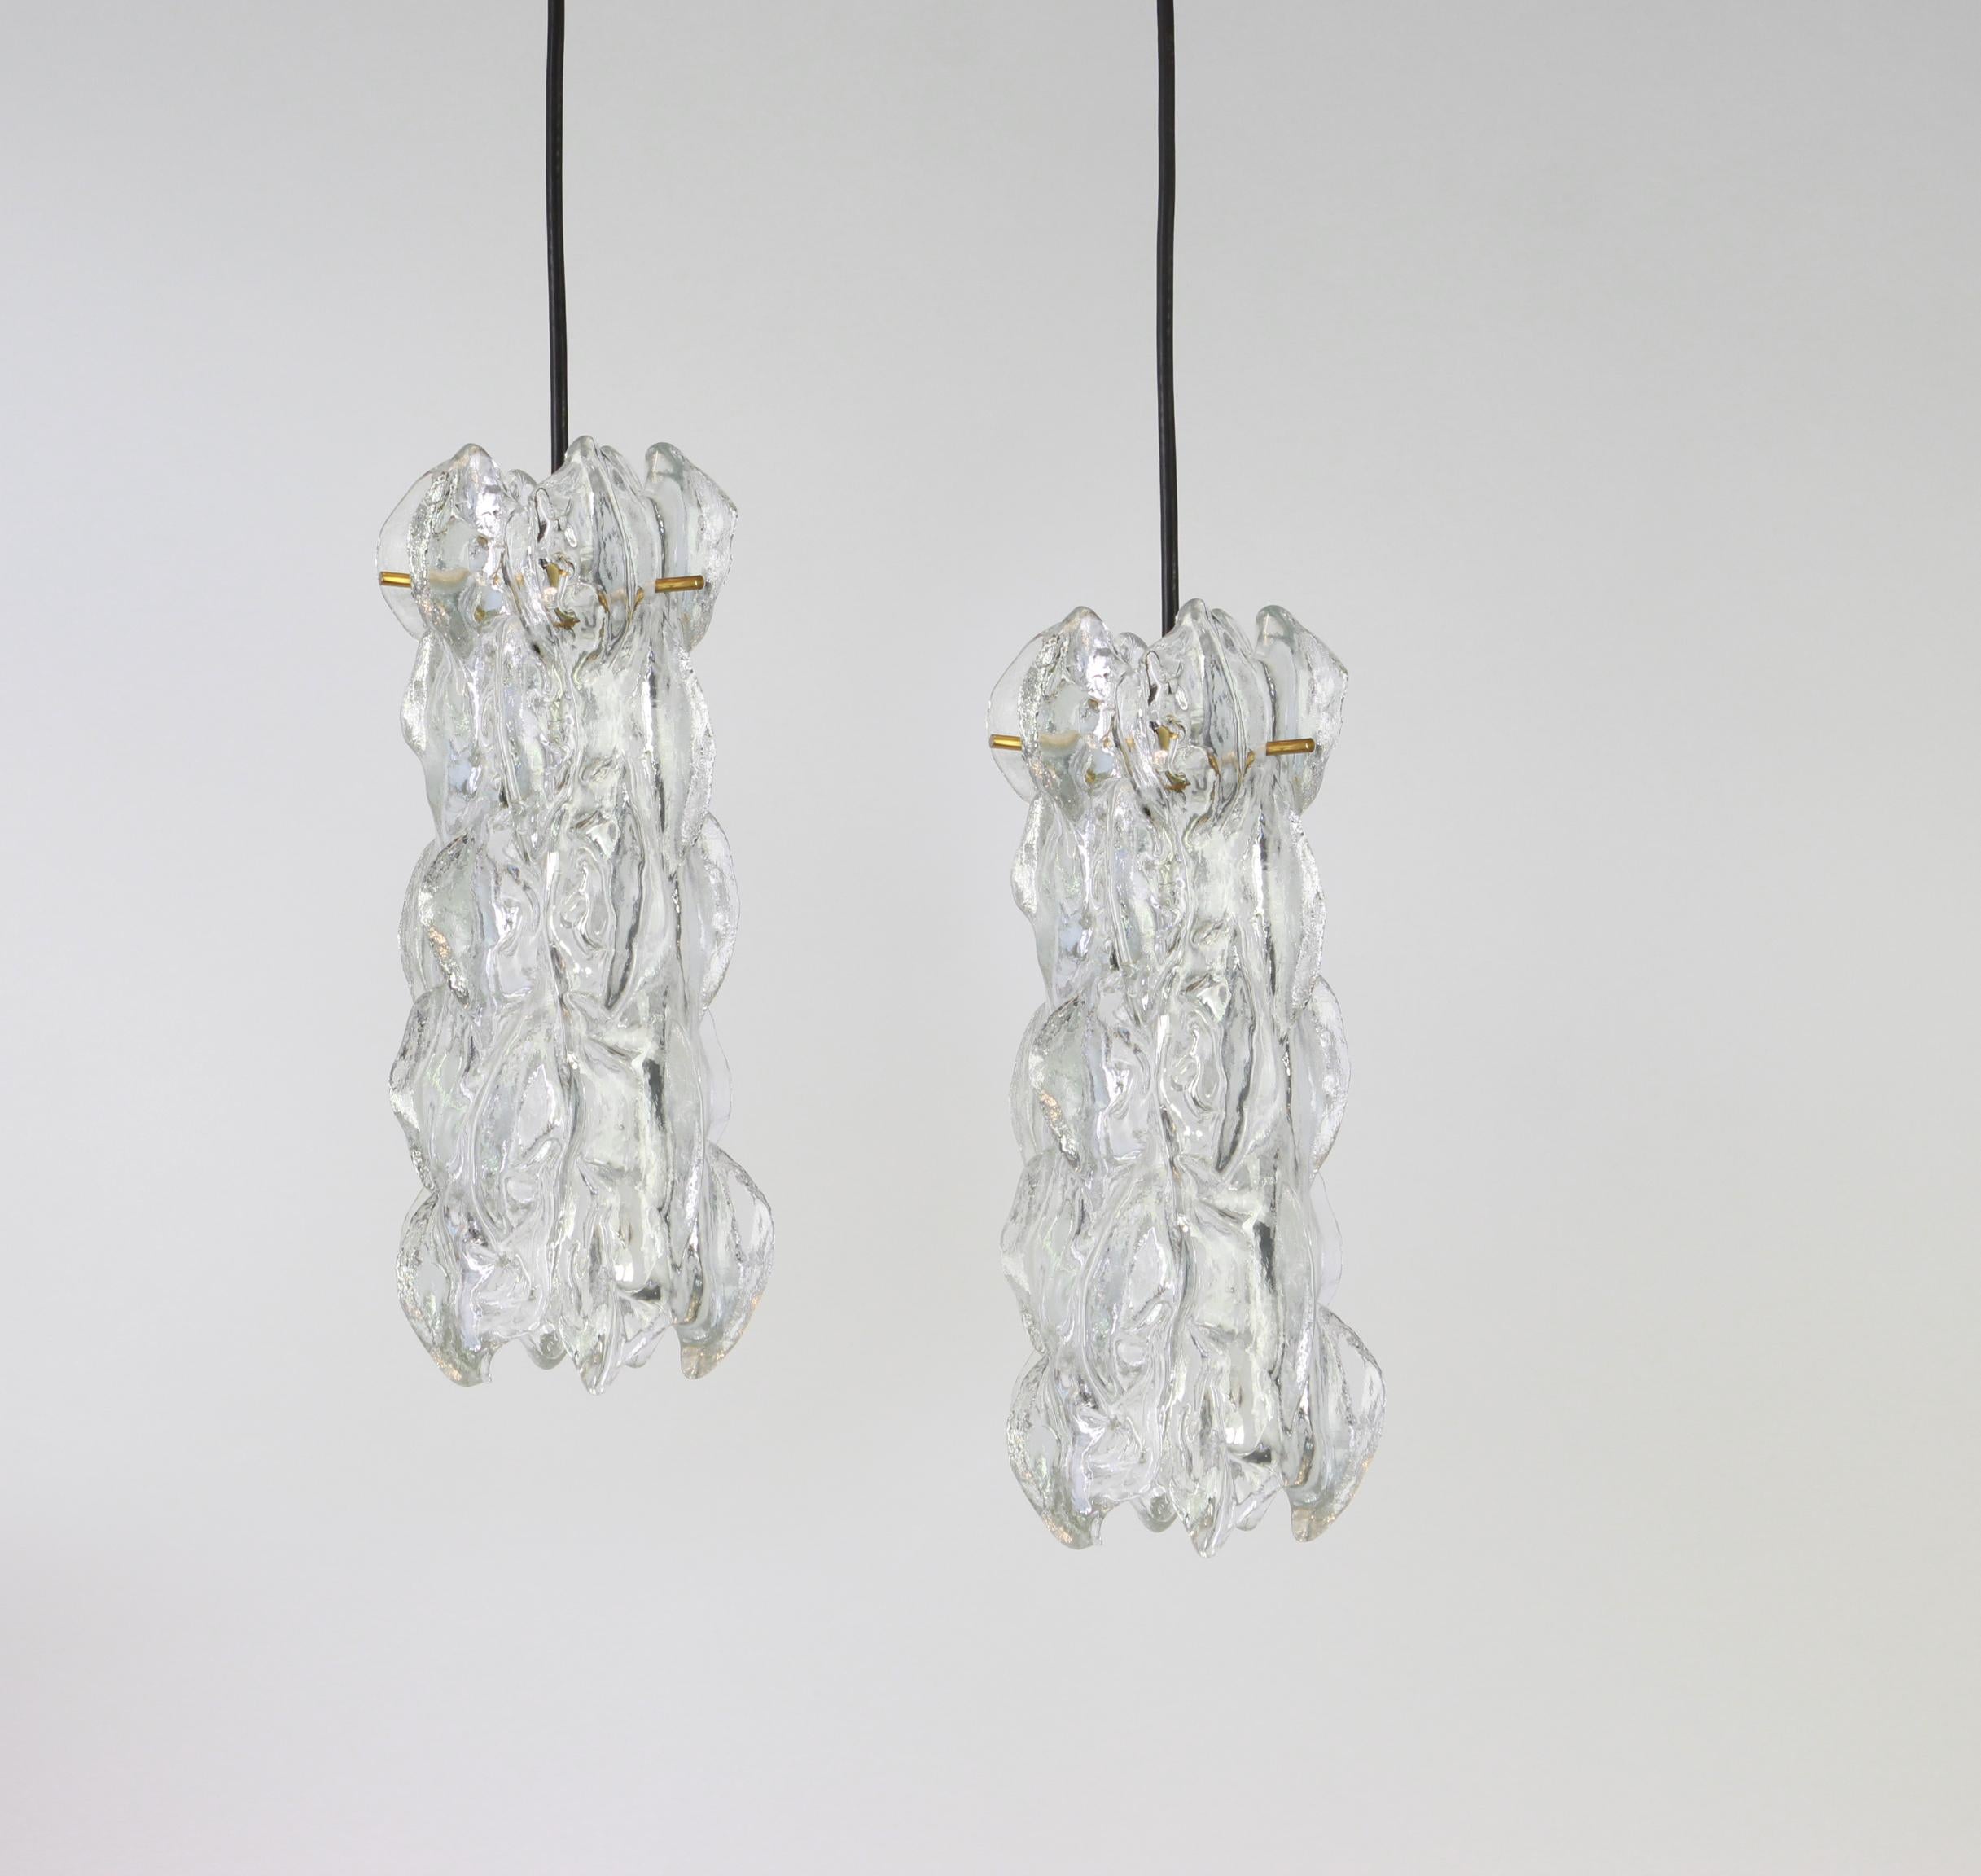 1 of 2 Petite Murano pendant lights designed by Carlo Nason for Kalmar, 1970s
Heavy quality and in very good condition. Cleaned, well-wired, and ready to use. Each Pendant requires one E14 Standard bulb with 40W max and compatible with the US/UK/